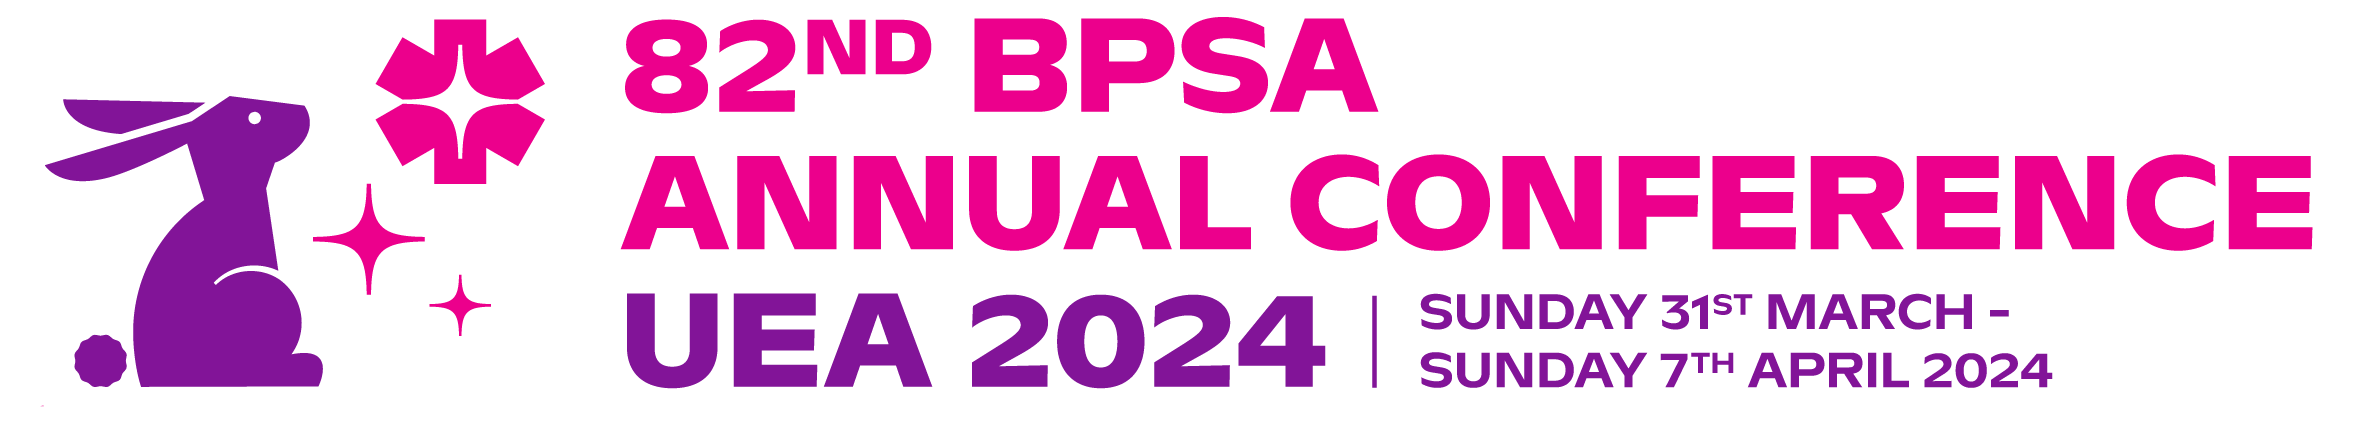 BPSA 82nd Annual Conference